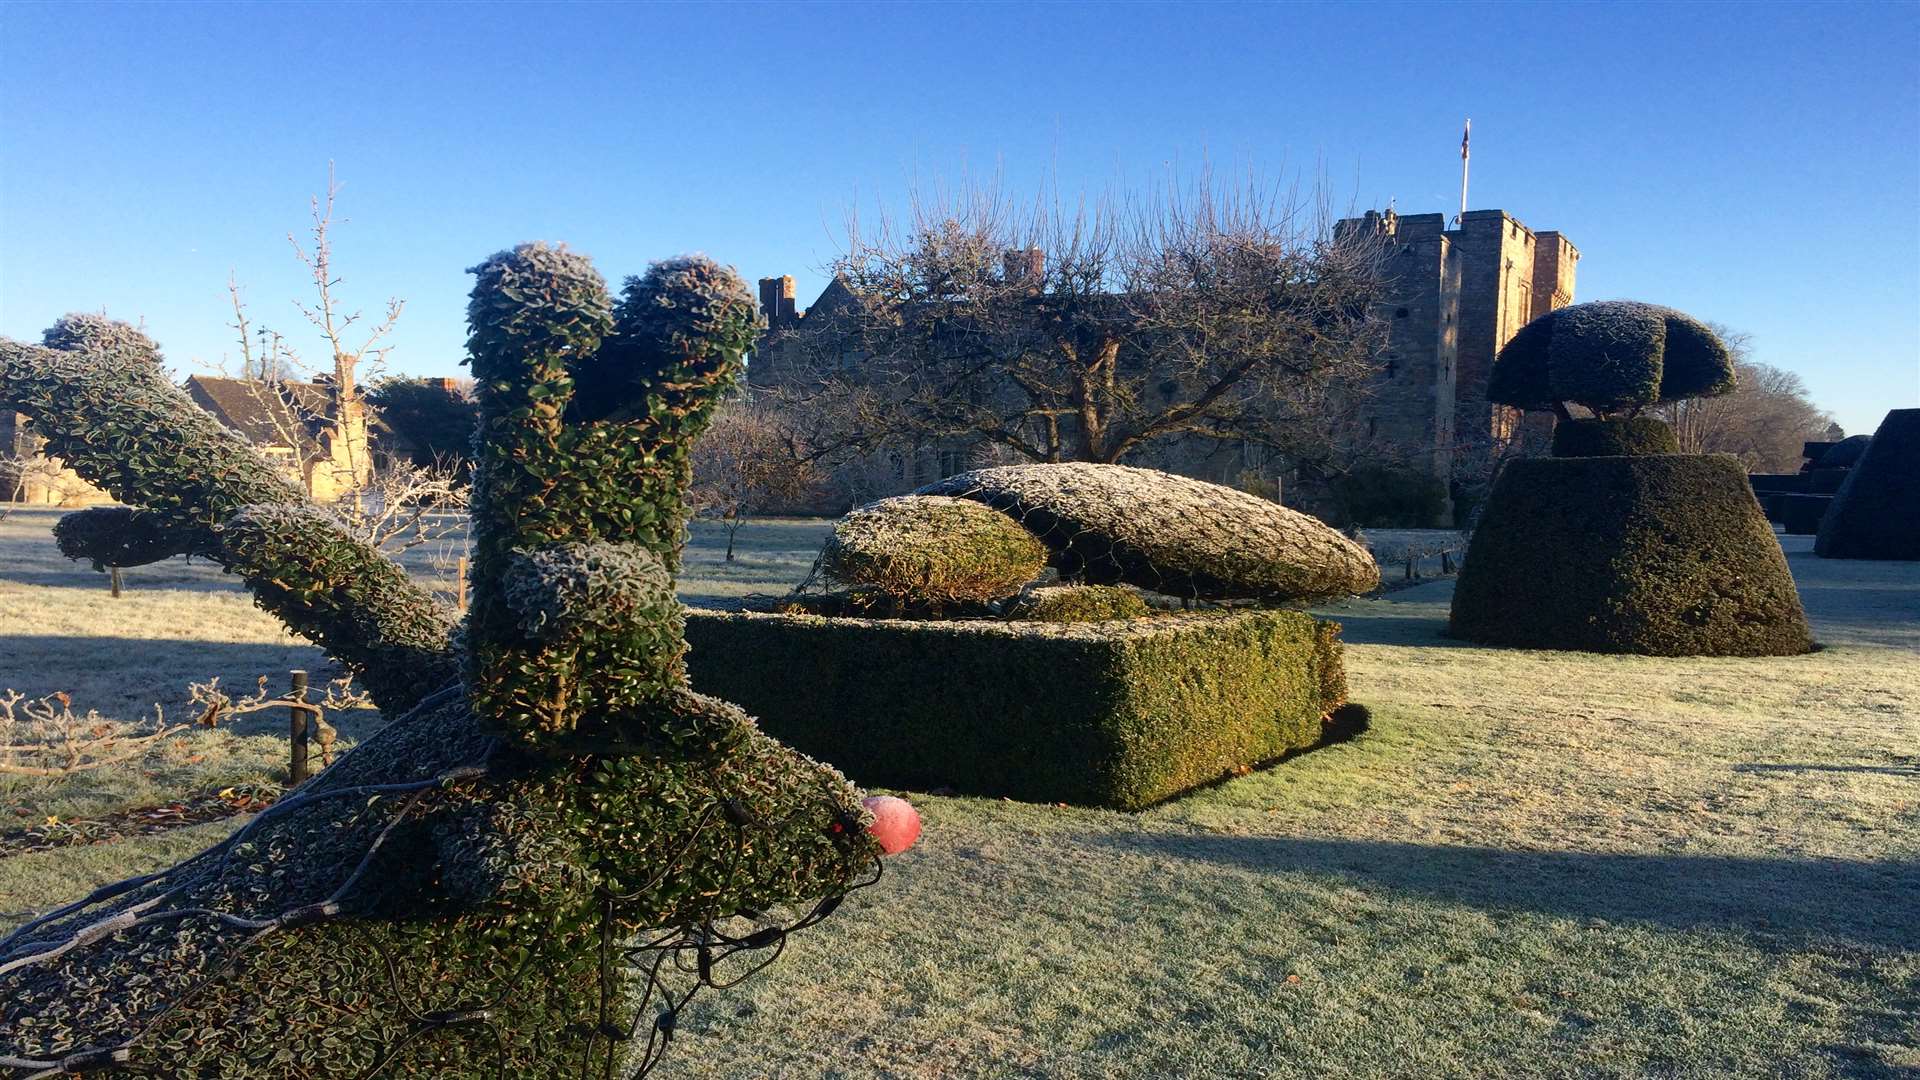 Another frosty morning at Hever